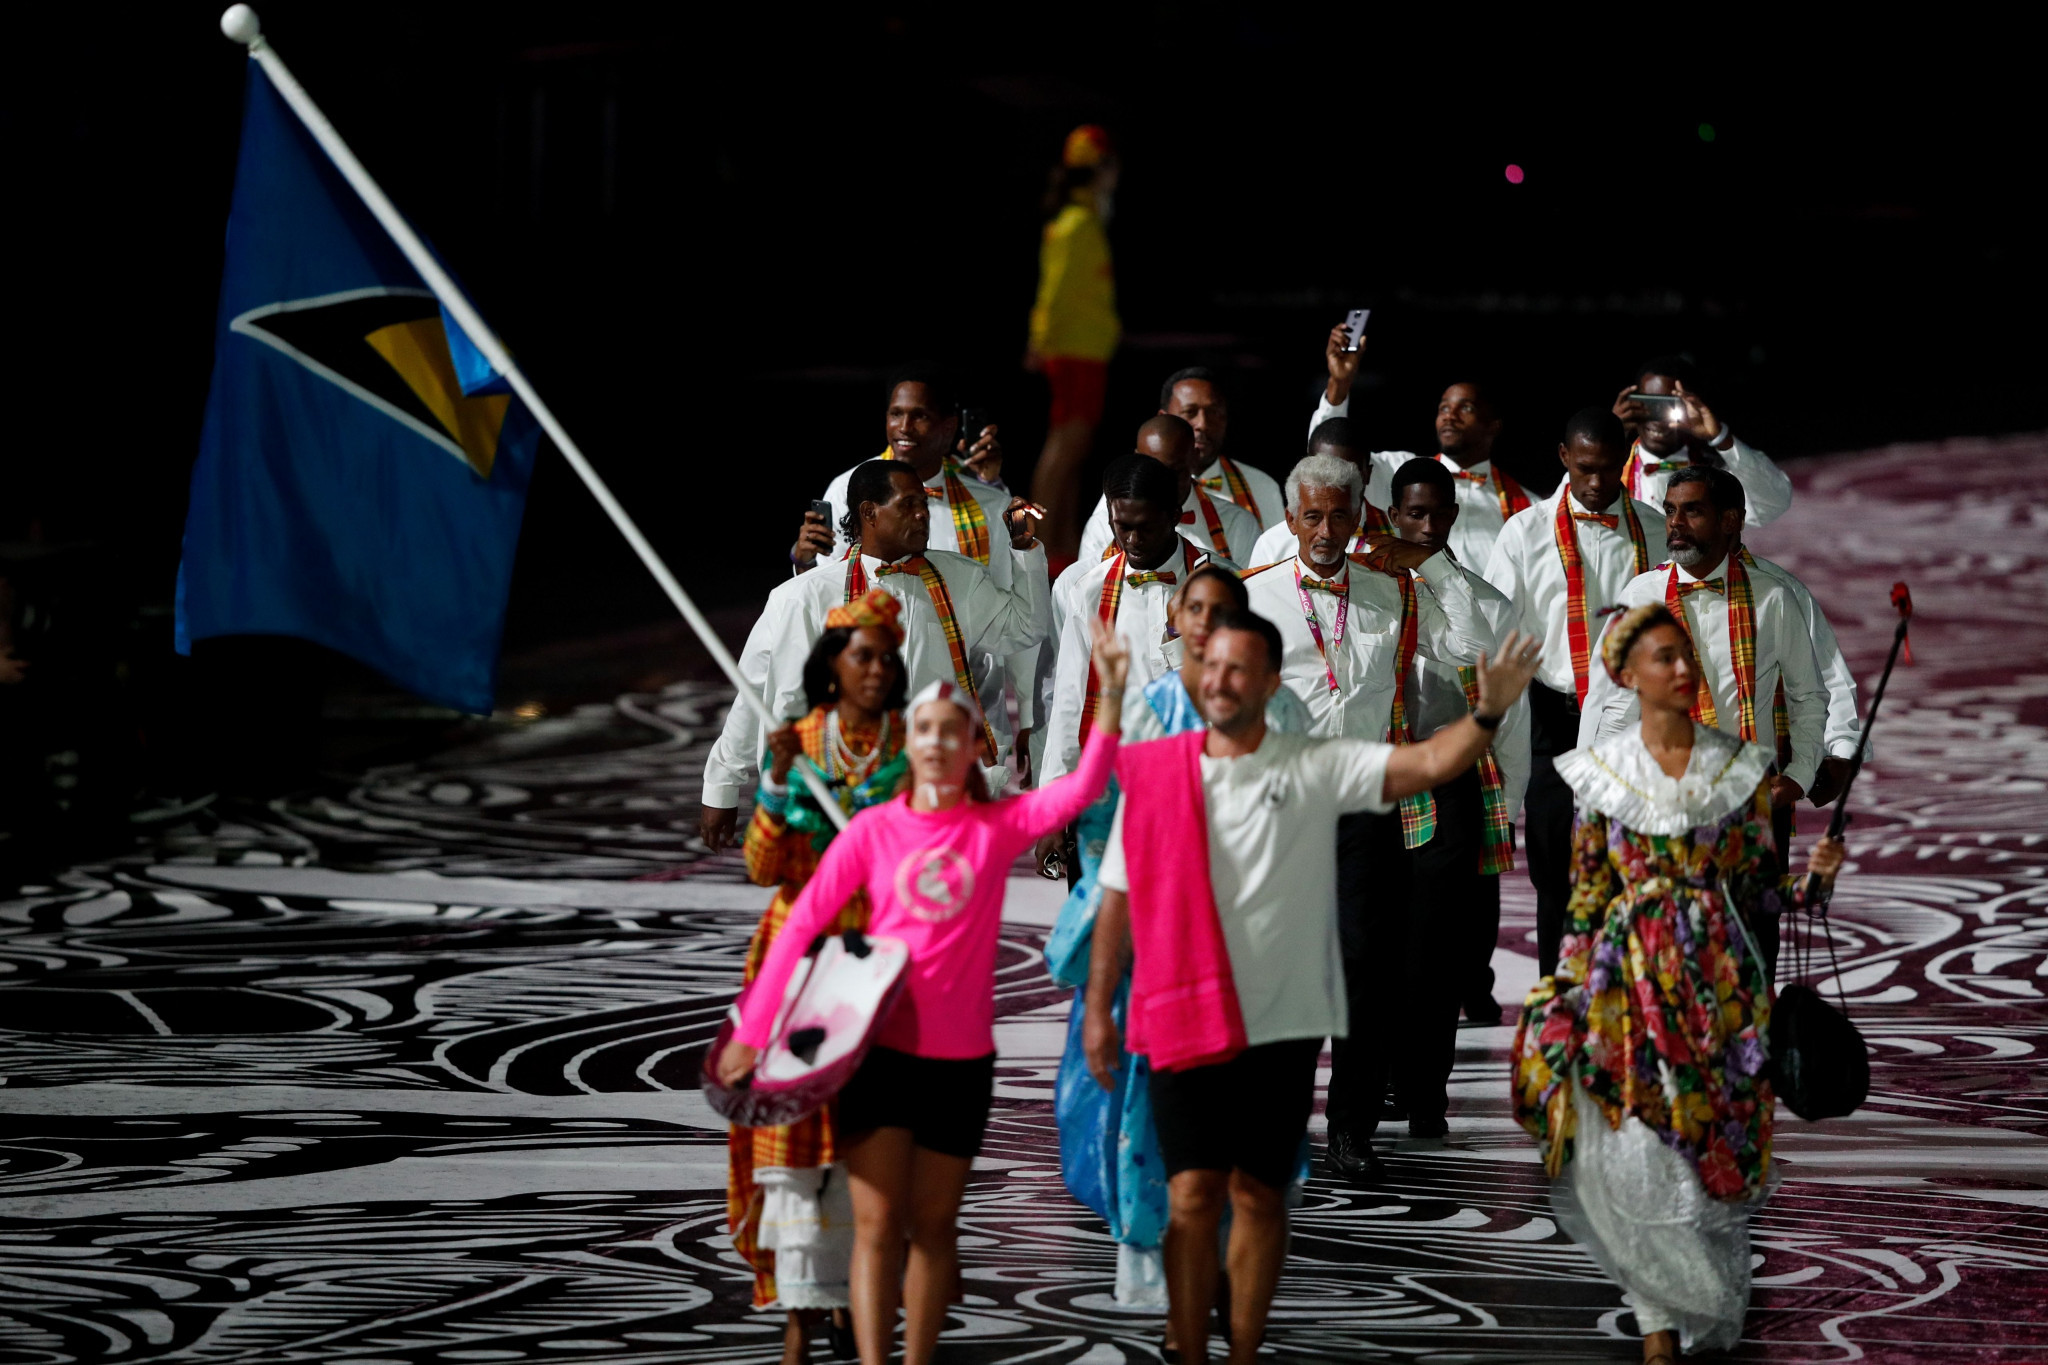 St Lucia has won four medals in its Commonwealth Games history ©Getty Images